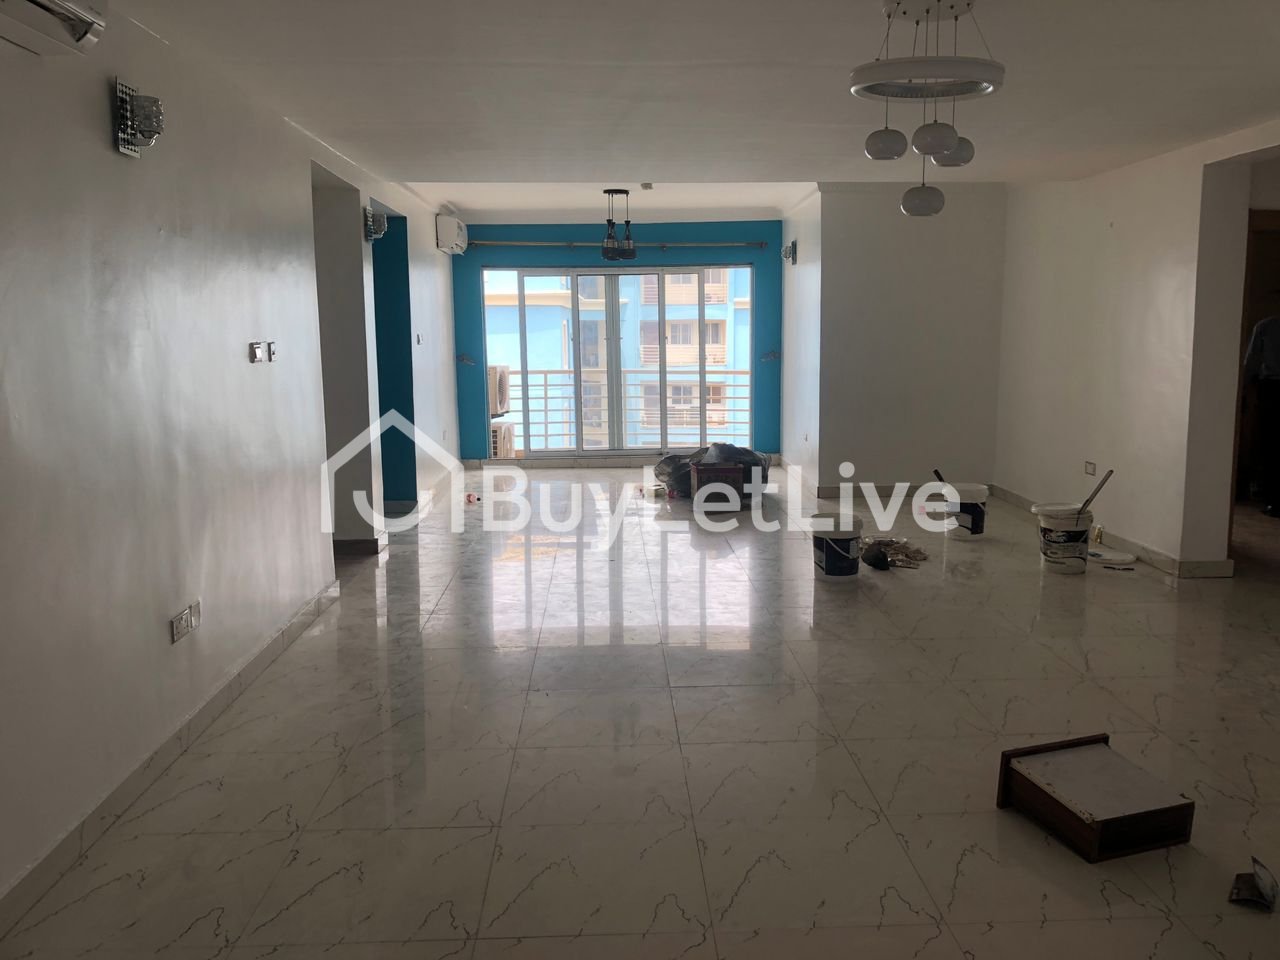 2 Units of 4 bedrooms Flat / Apartment for rent at Ikate